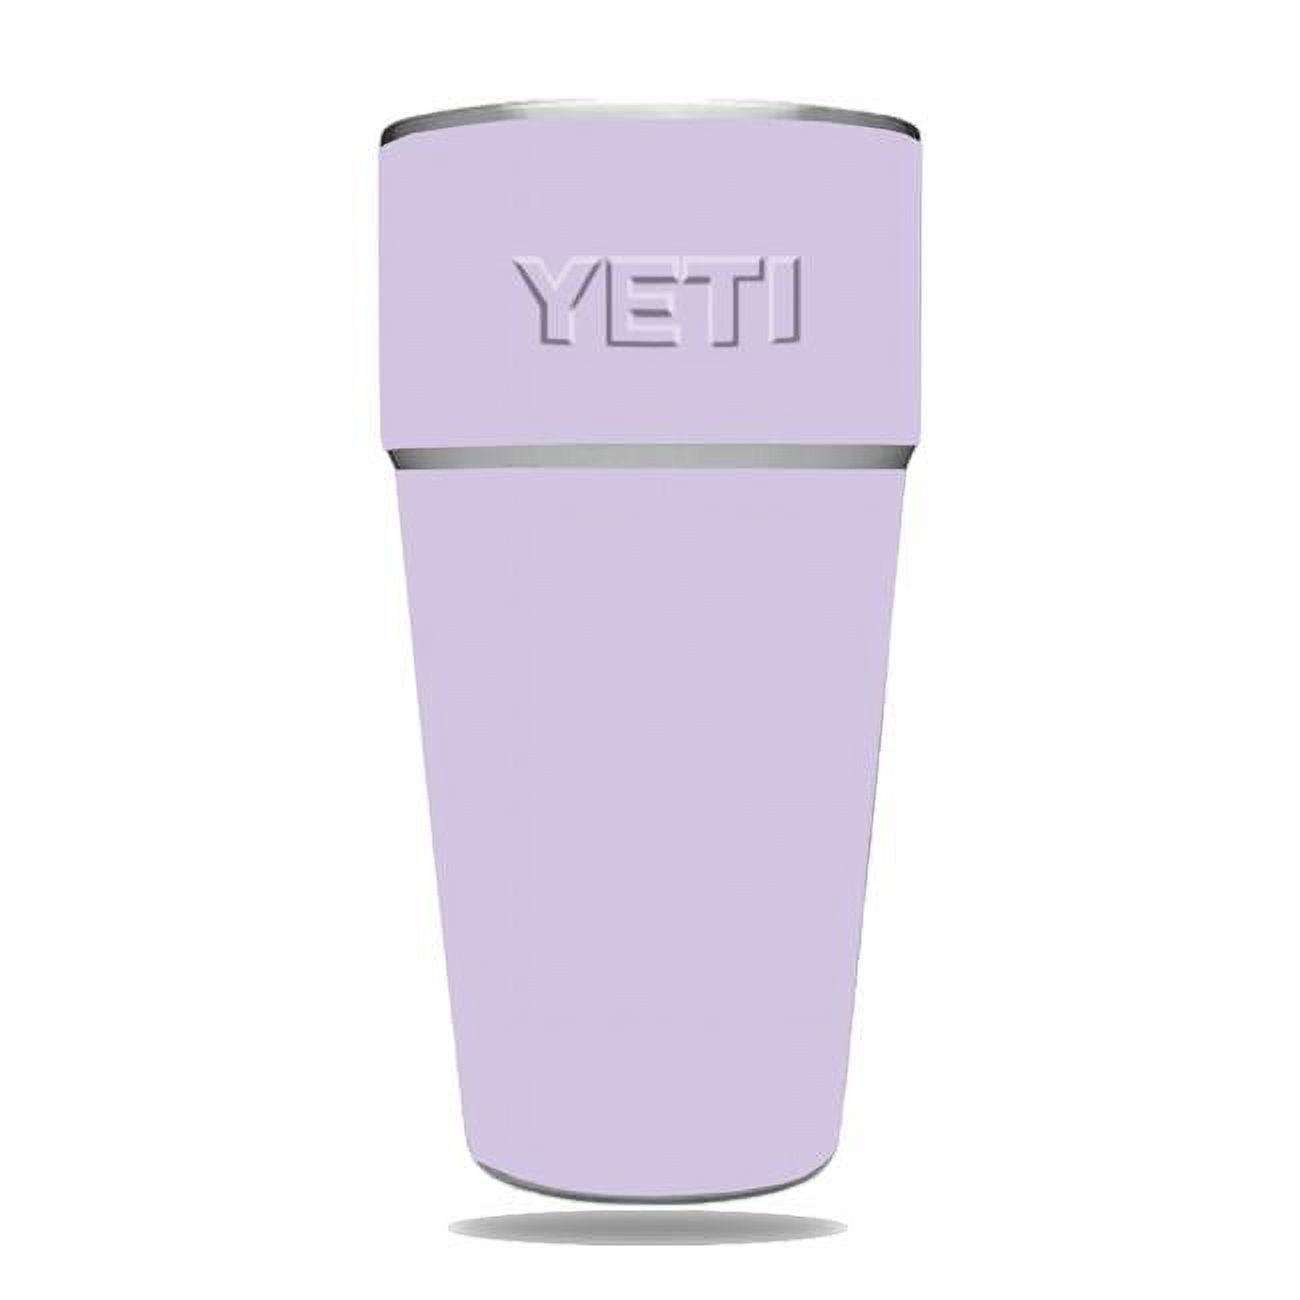 11 Yeti cups perfect for you, whether you're a runner or cocoa